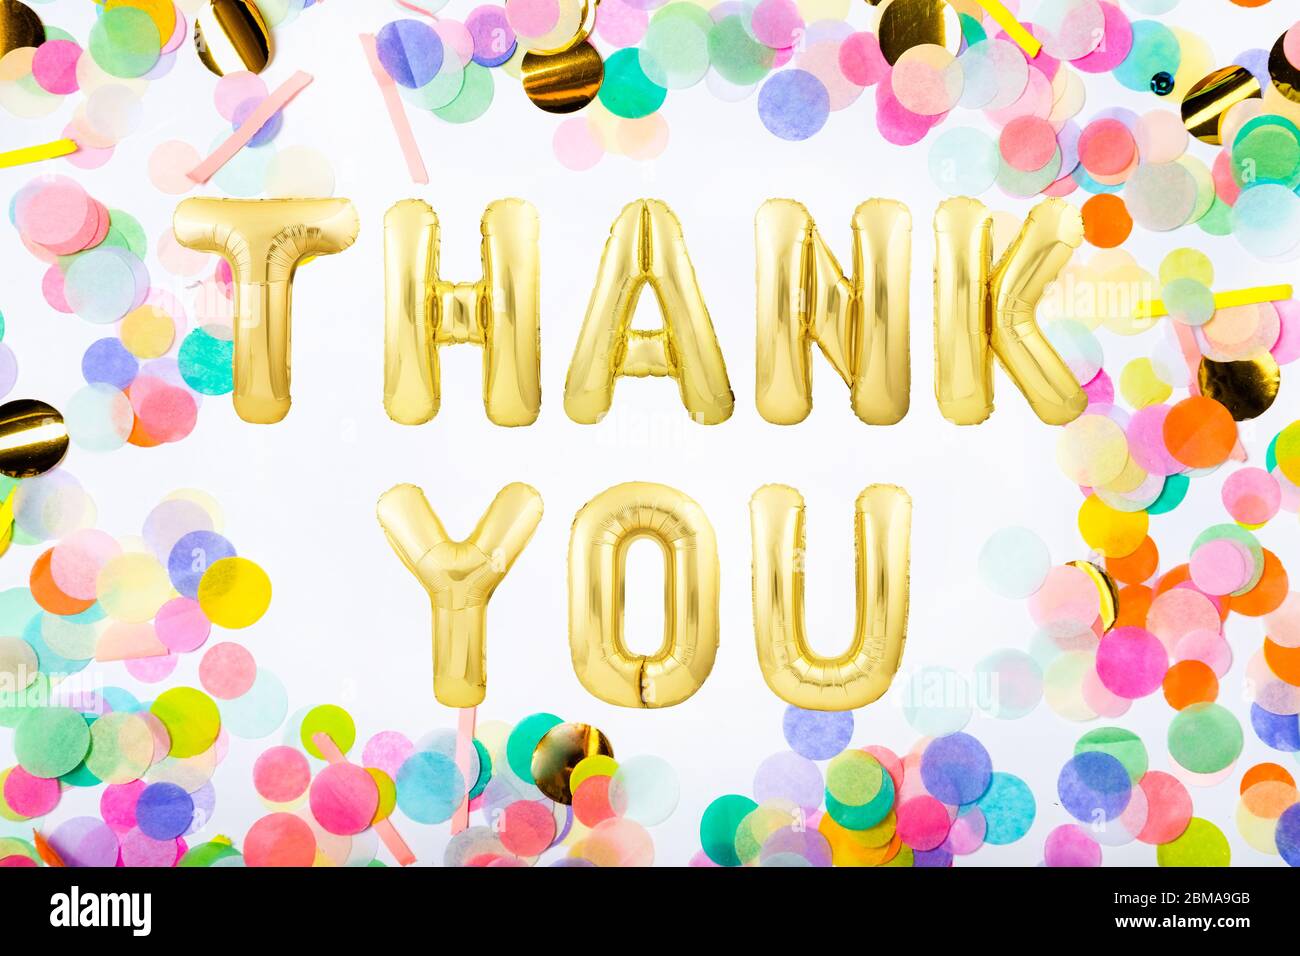 Words THANK YOU made of golden inflatable balloon letters in a frame made  of colorful confetti Stock Photo - Alamy